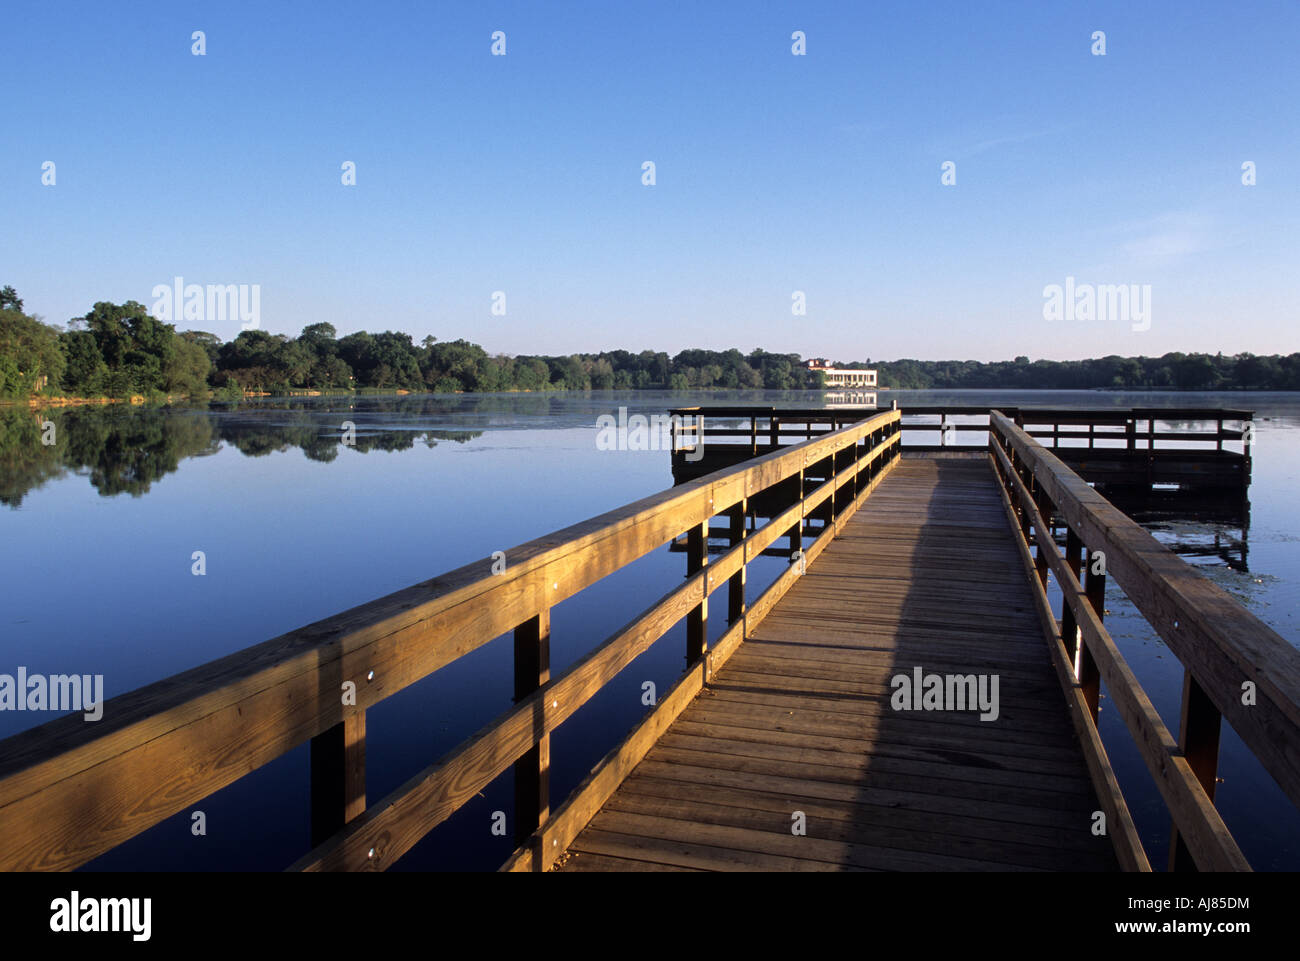 VIEWING DOCK ON COMO LAKE, COMO PARK IN ST. PAUL, MINNESOTA.  PAVILION IN BACKGROUND.  SUMMER DAY. Stock Photo